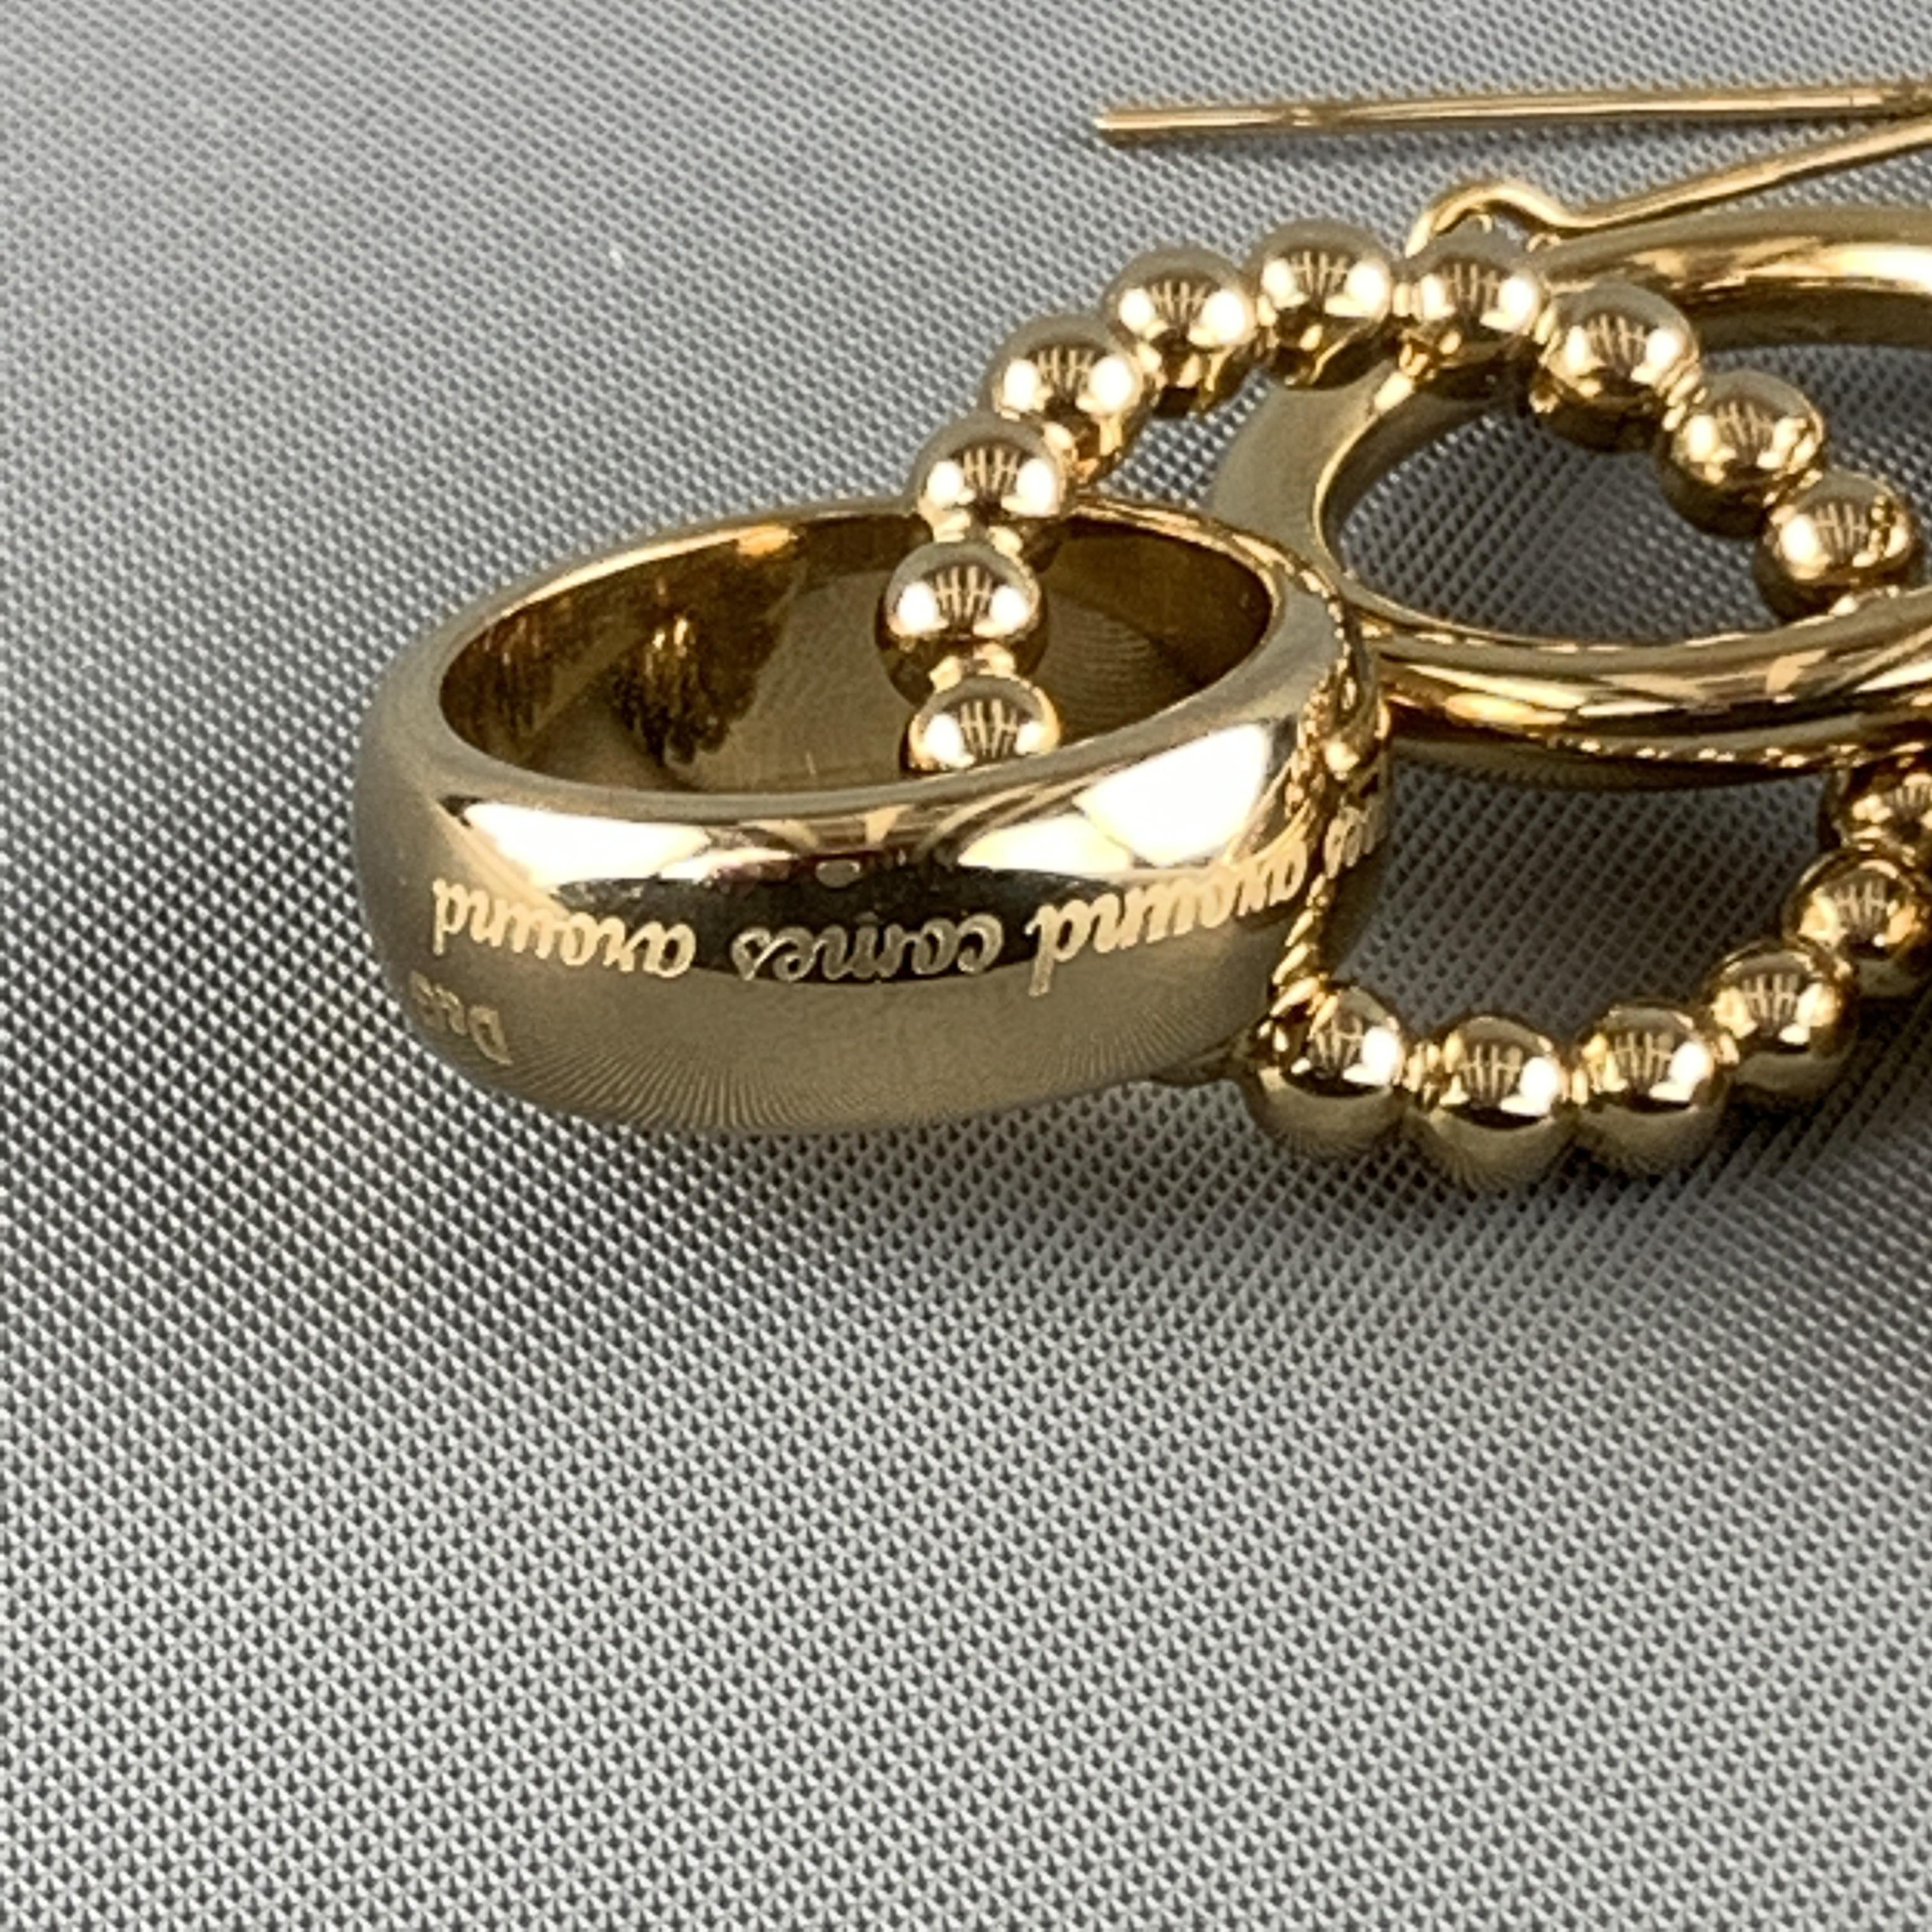 D&G DOLCE & GABBANA earrings come in gold tone meatal and feature three hoop rings with 